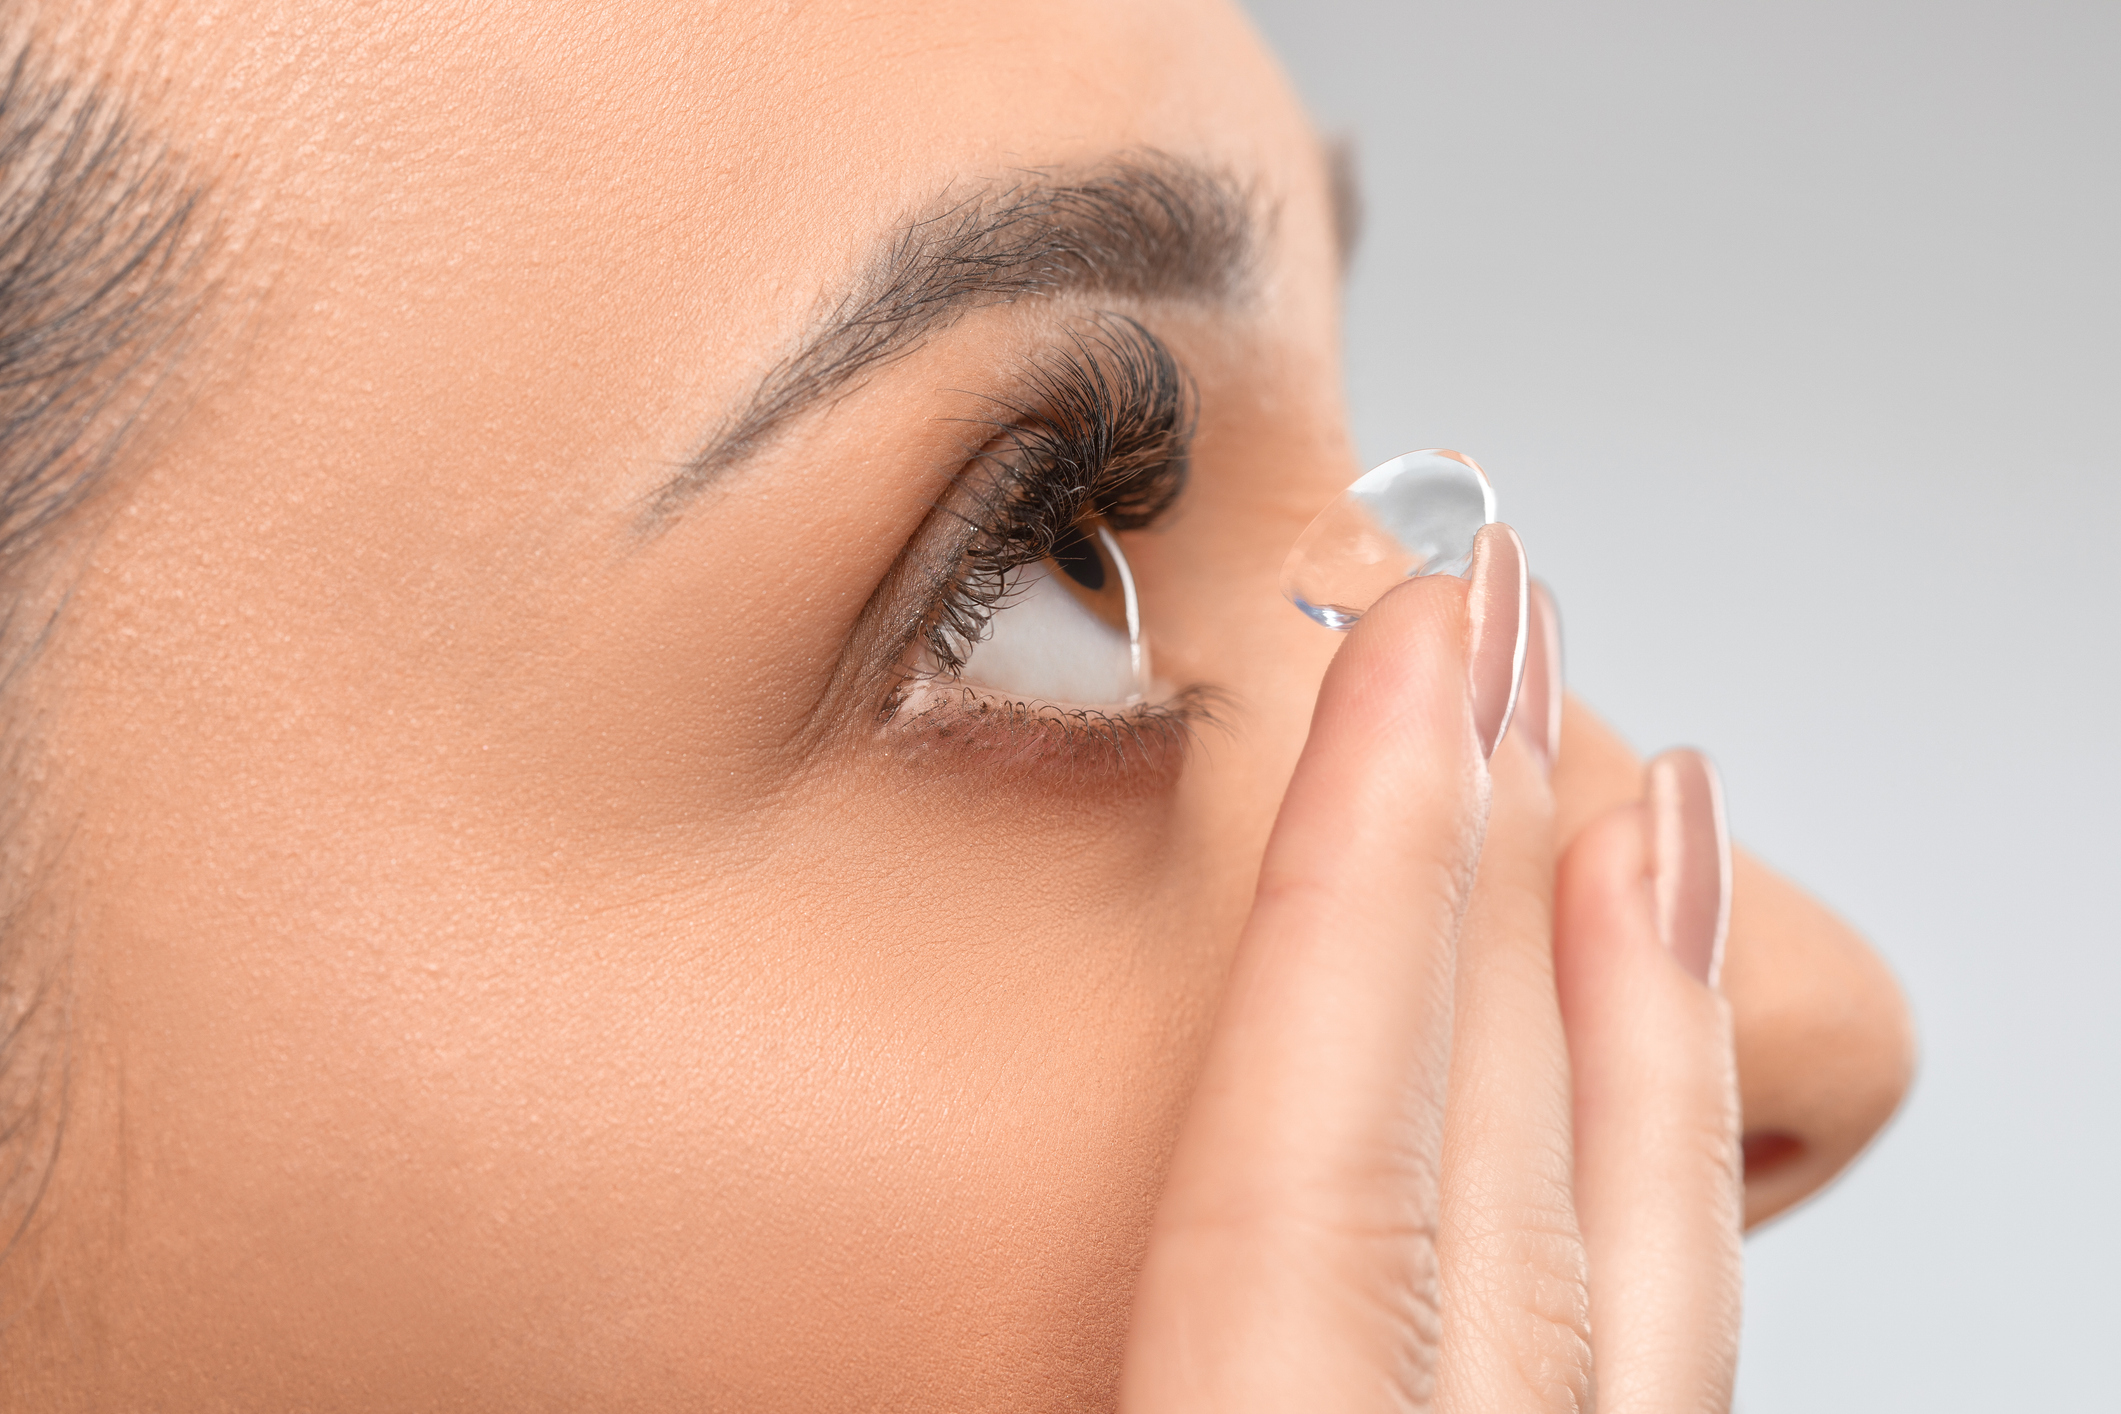 Guide to Maintaining Healthy Contact Lens Hygiene